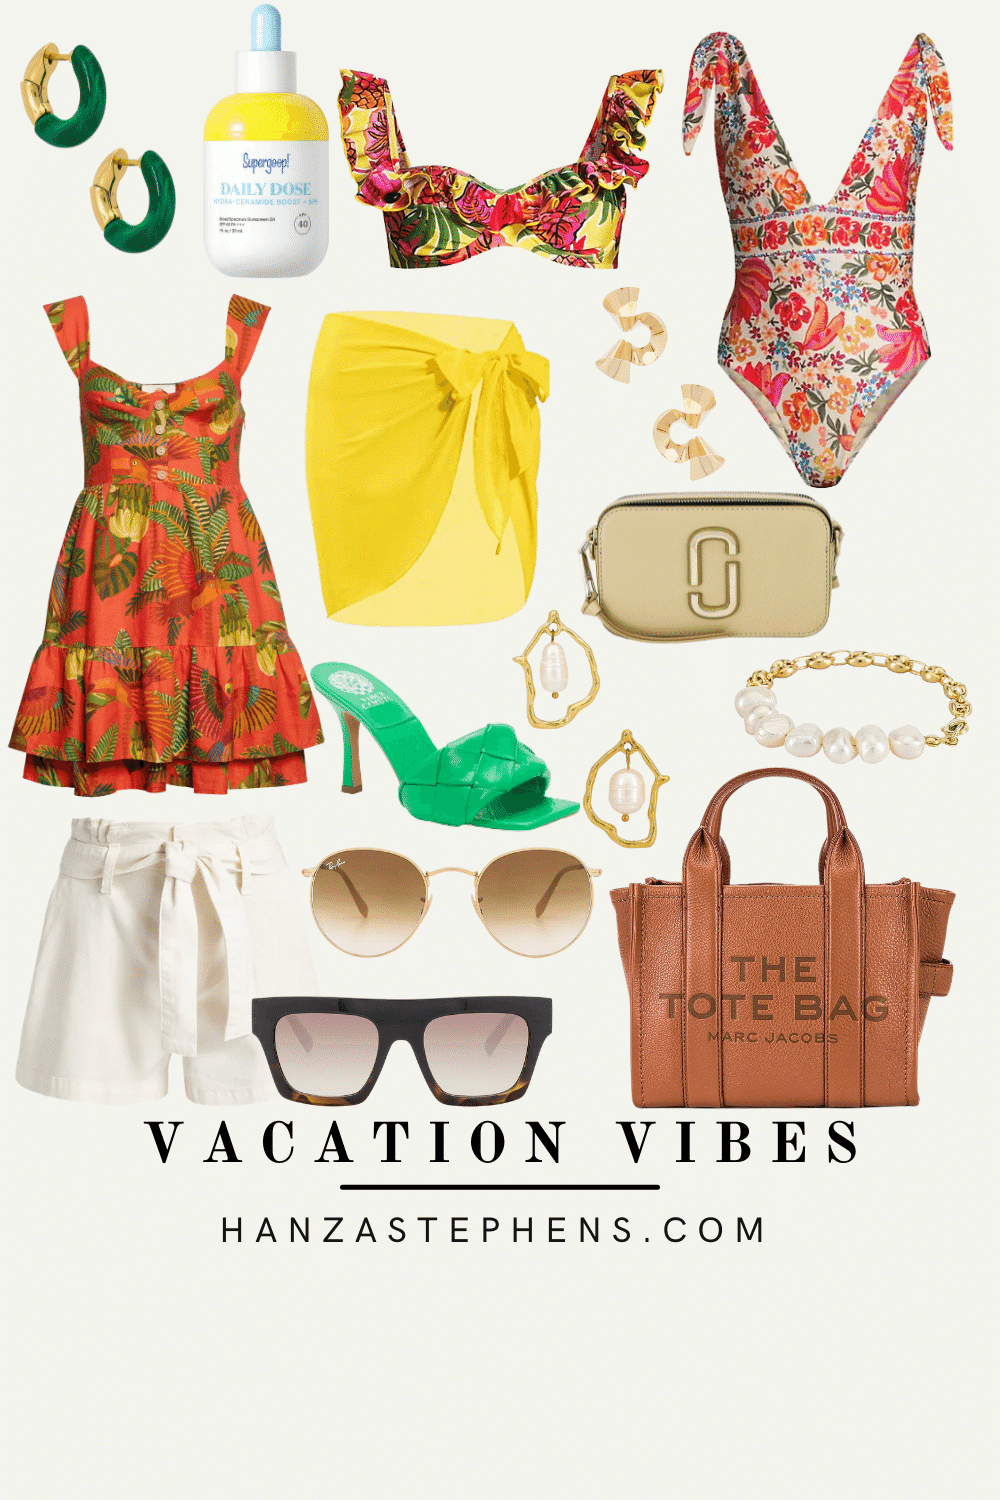 Vibrant Vacation Outfit Inspo You Need for your Upcoming Trip